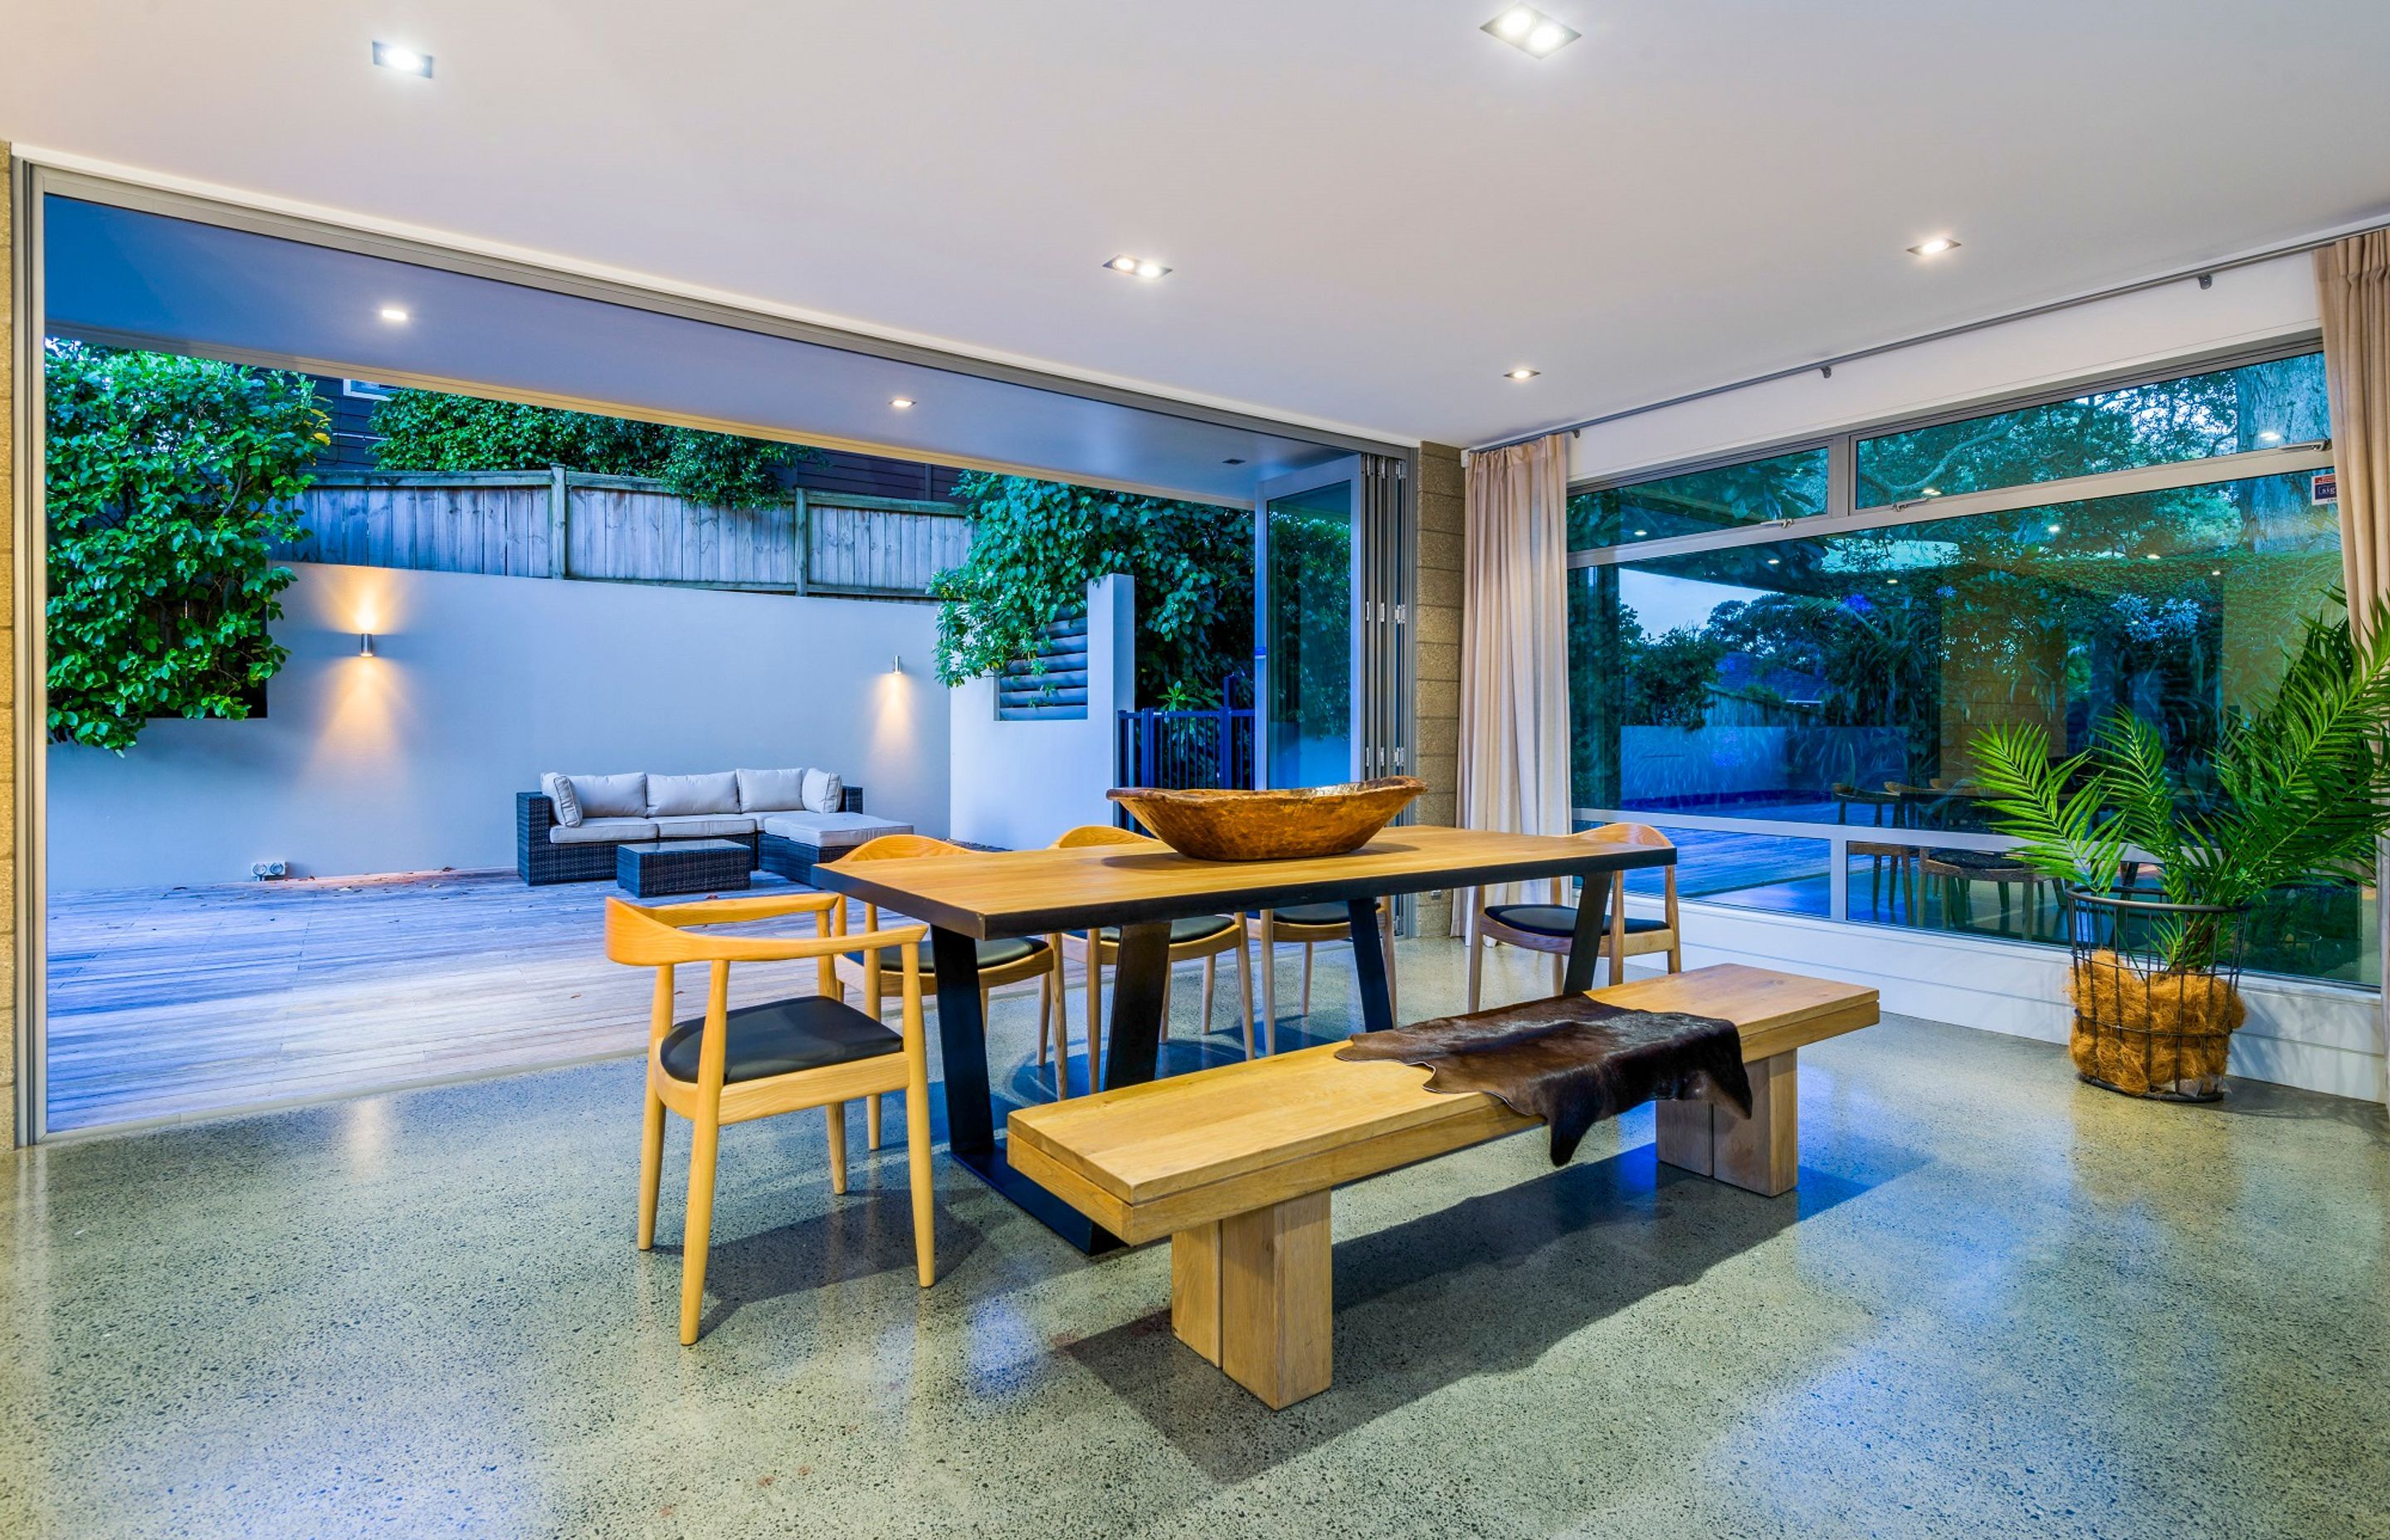 Concrete home still has the wow factor – 10 years on